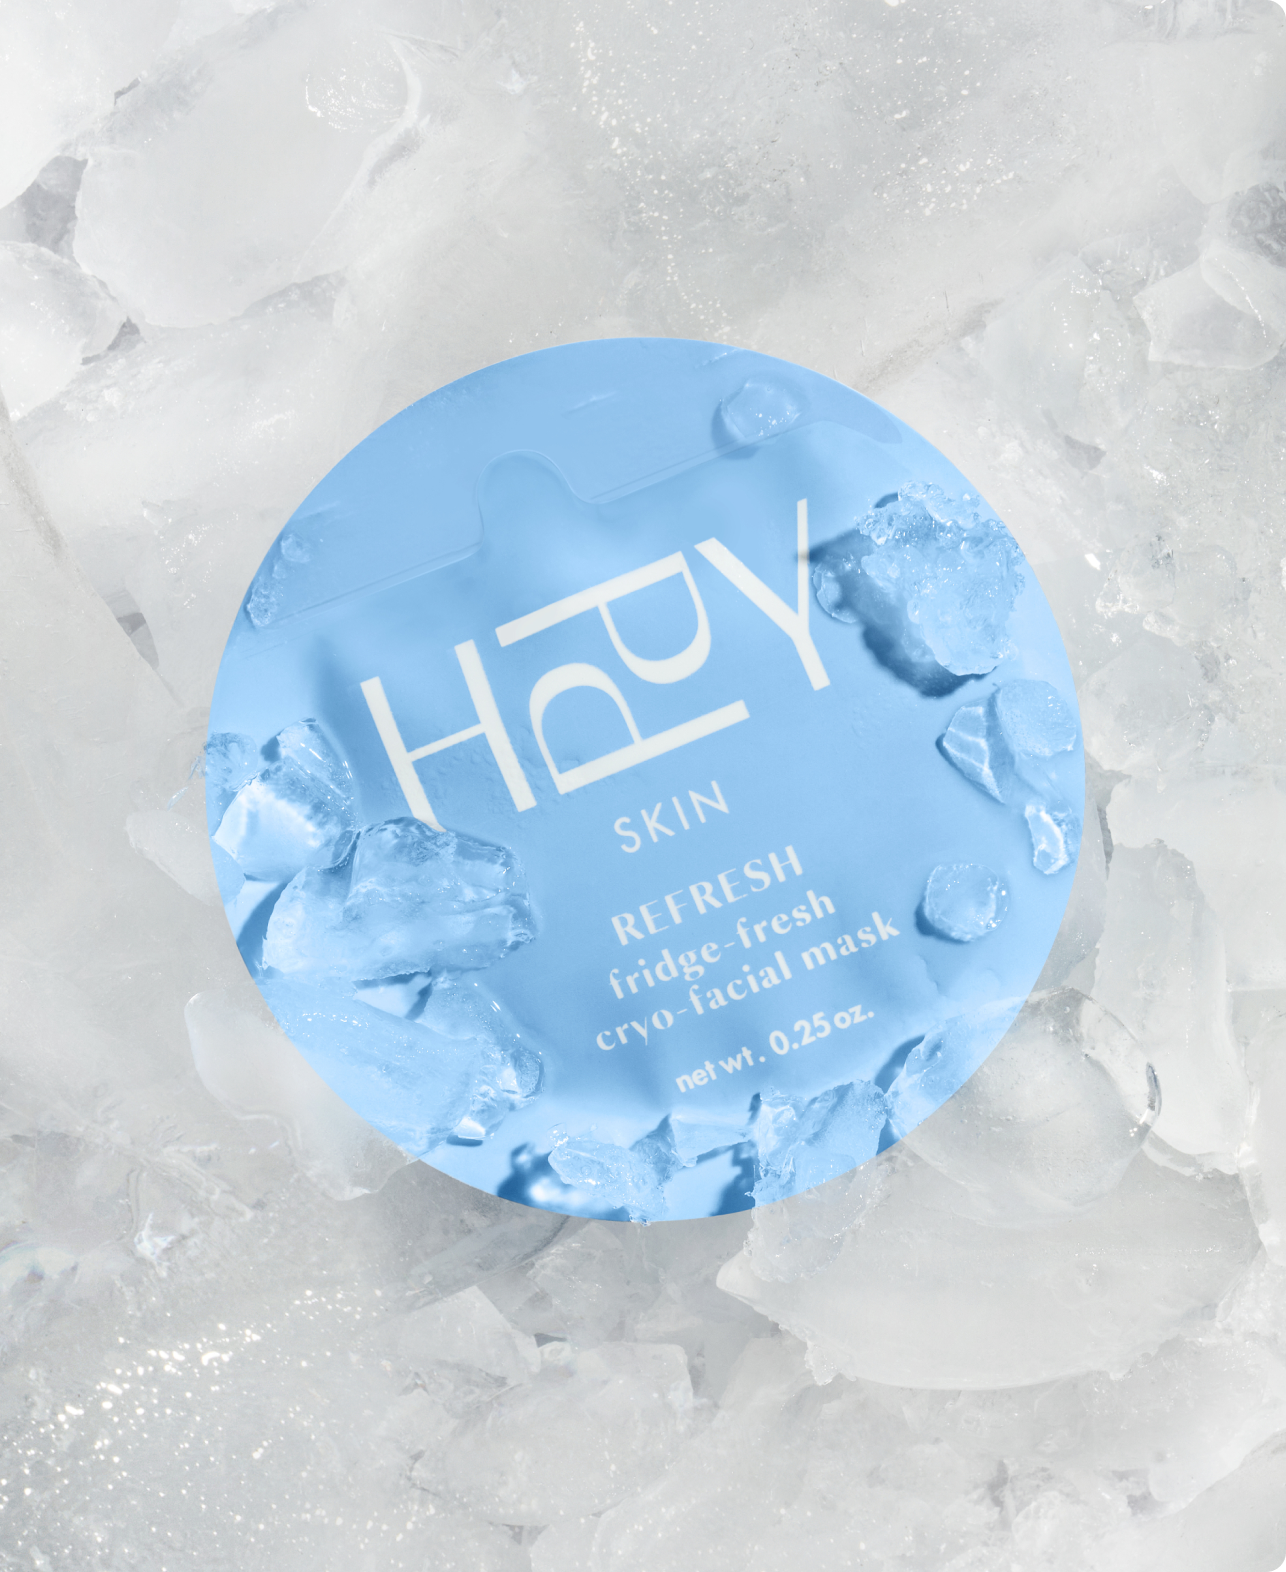 HPPY Skin product on ice